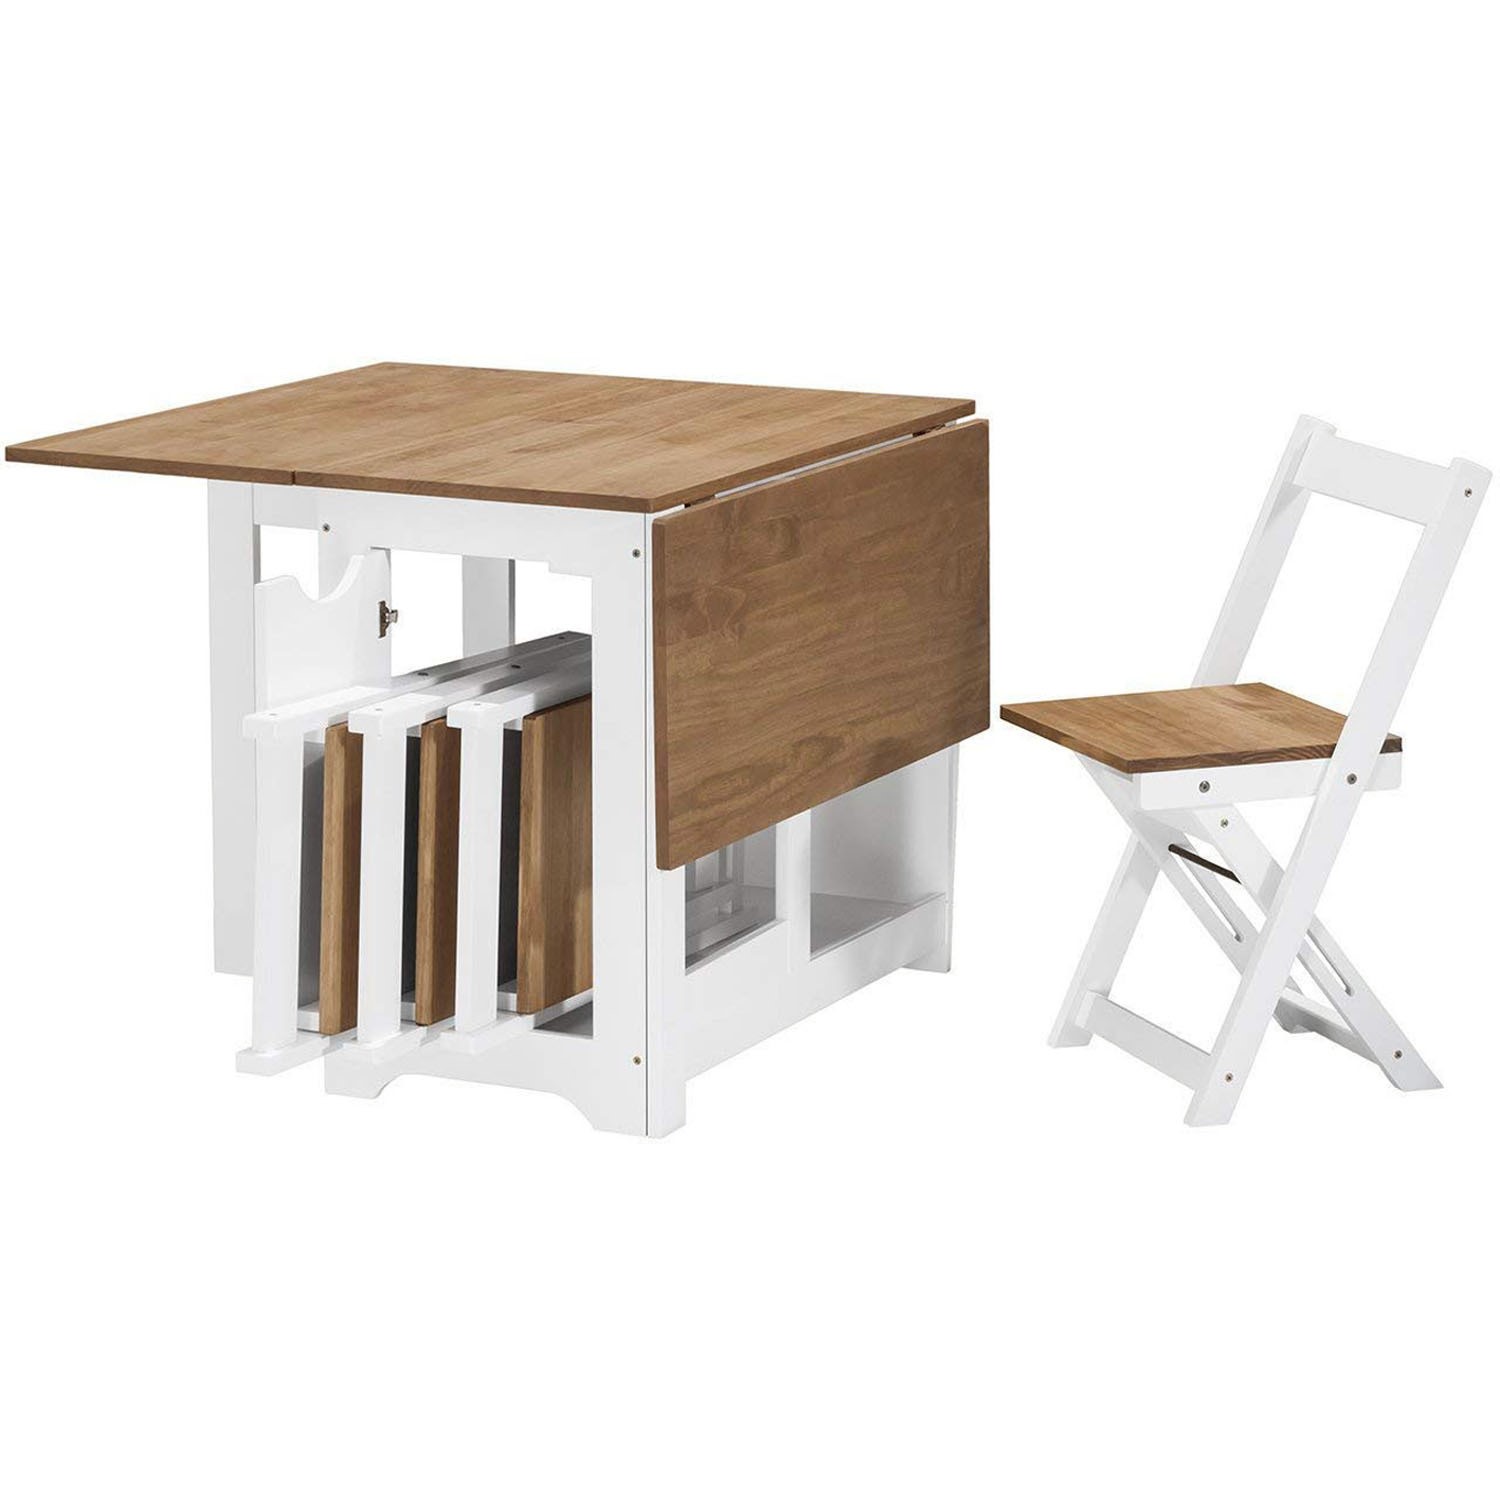 Seconique Santos Butterfly Folding Dining Set With 4 Dining Chairs In White Pine Furniture123